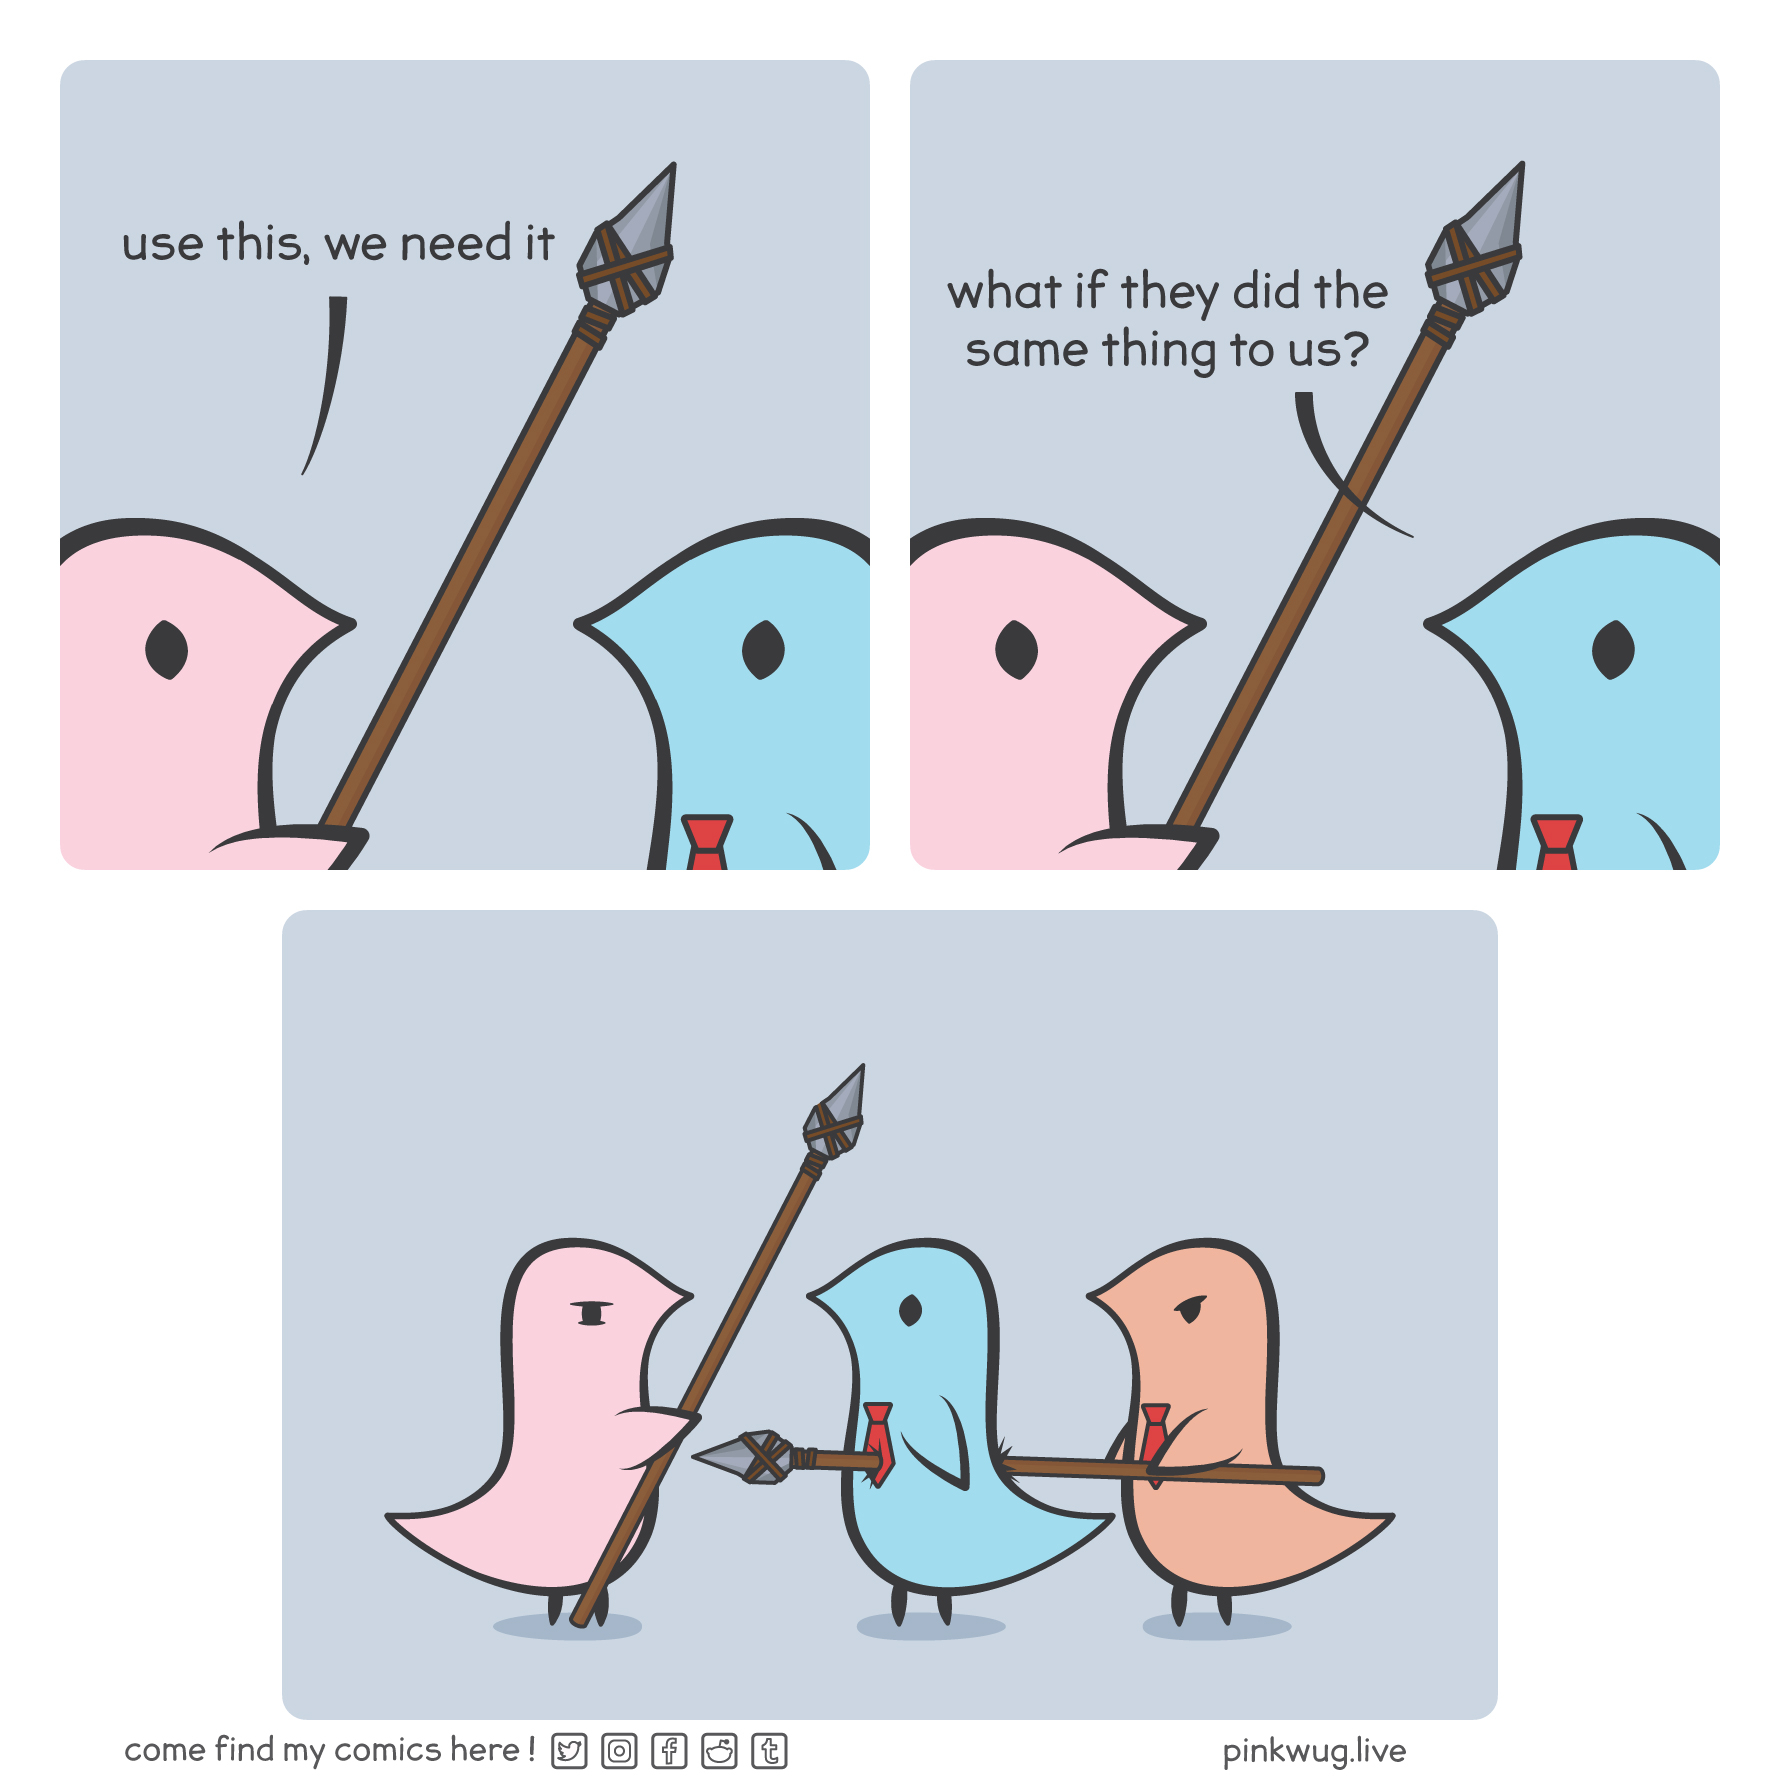 pinkwug comic: Panel 1:
Pink wug hands a spear to blue wug saying: "use this, we need it"

Panel 2:
Blue wug asks: "what if they did the same thing to us?"

Panel 3:
Zoomed out panel showing that an orange wug has already impaled the blue wug with a spear.